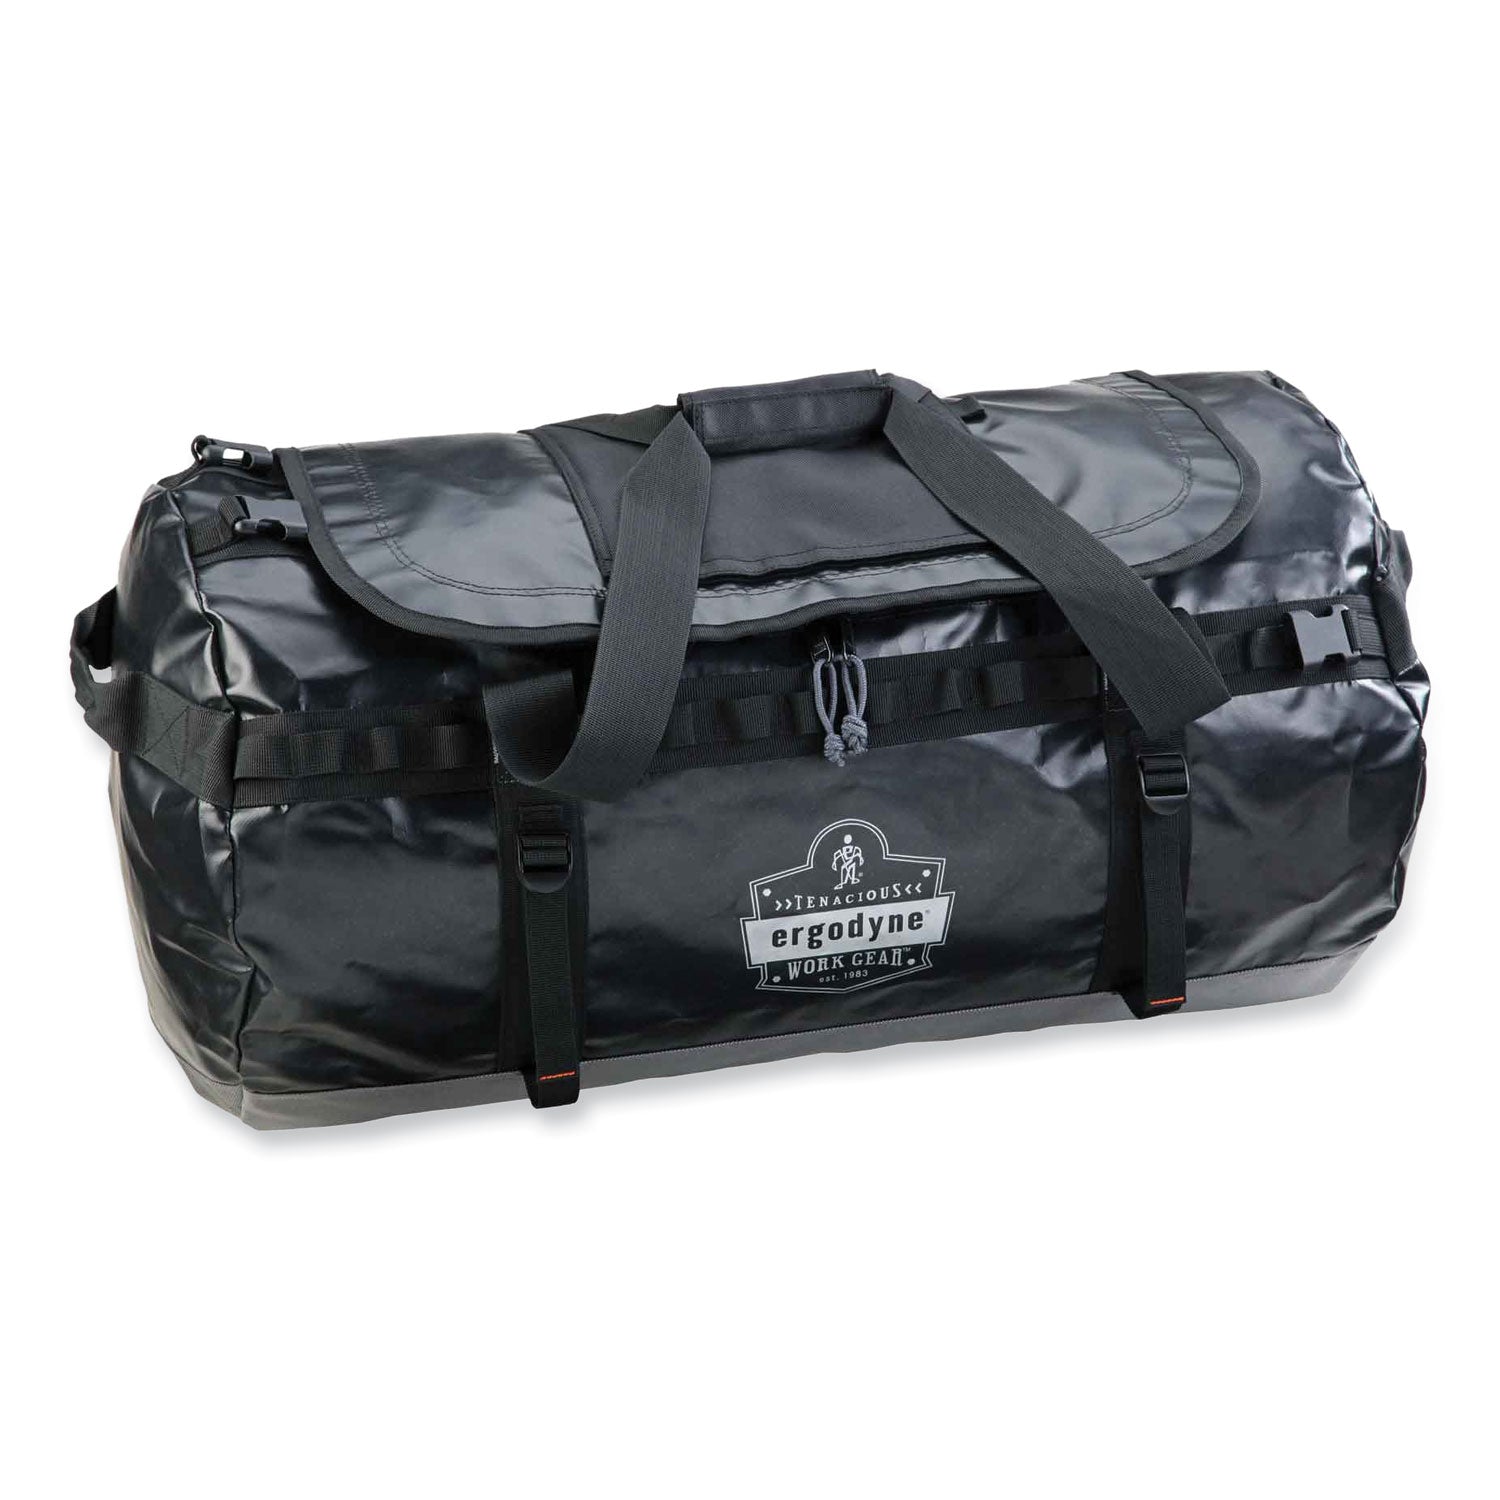 arsenal-5030-water-resistant-duffel-bag-large-185-x-31-x-185-black-ships-in-1-3-business-days_ego13034 - 1